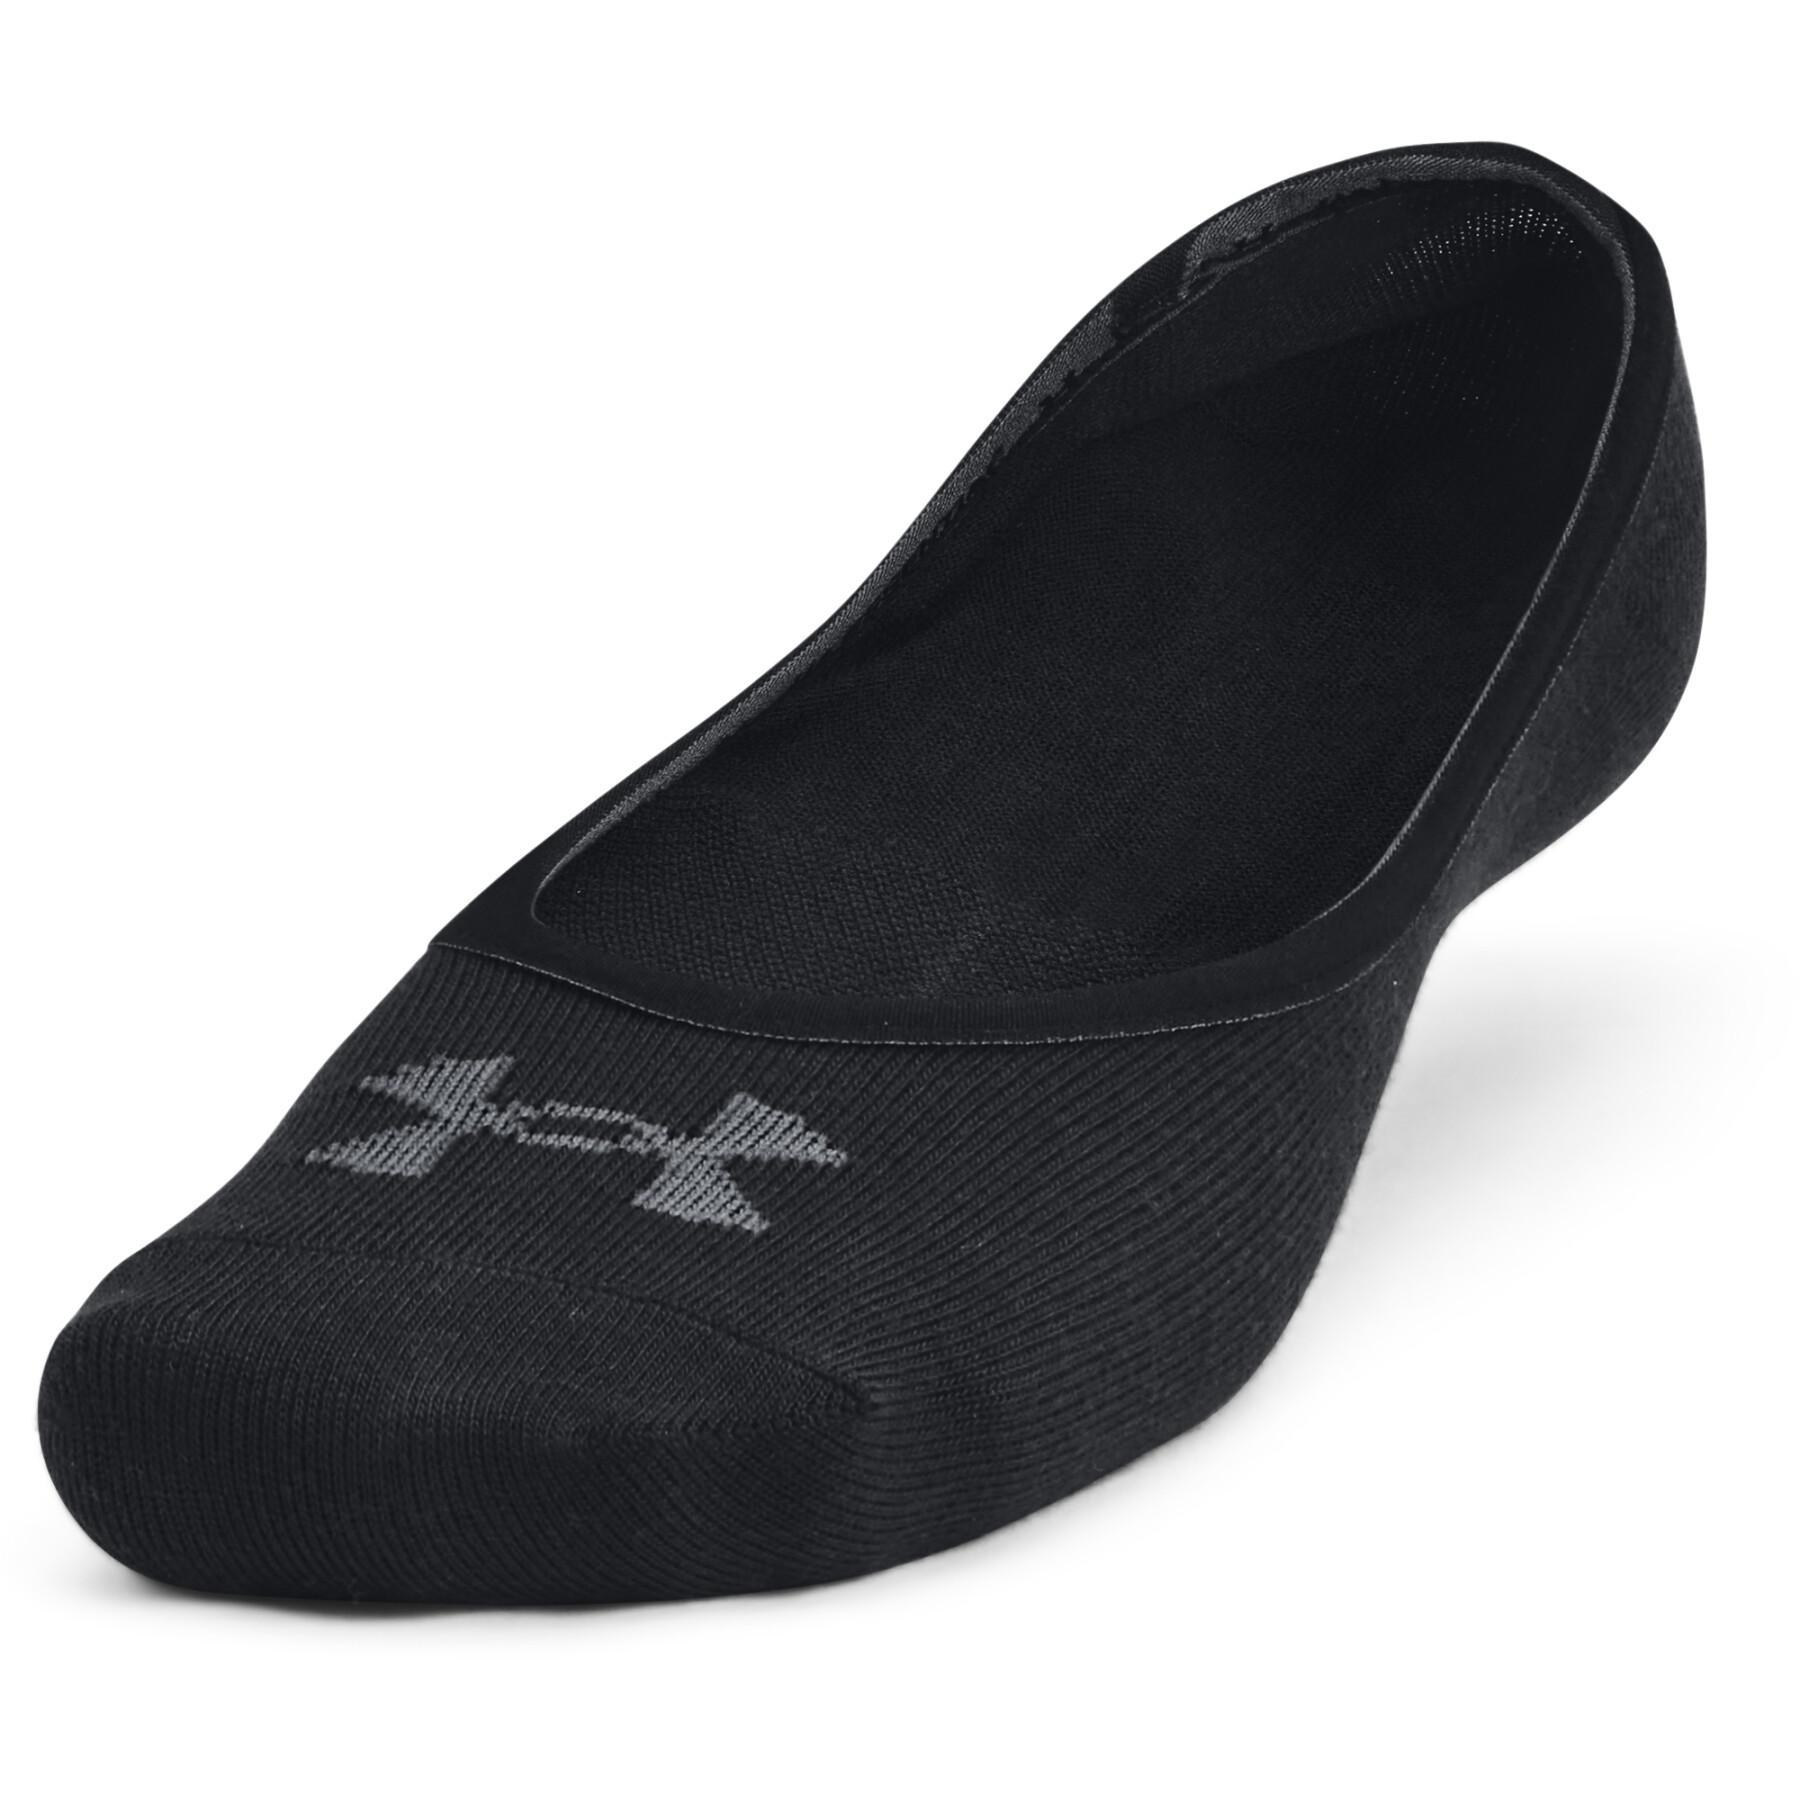 Set of 3 pairs of socks Under Armour Essential lolo liner